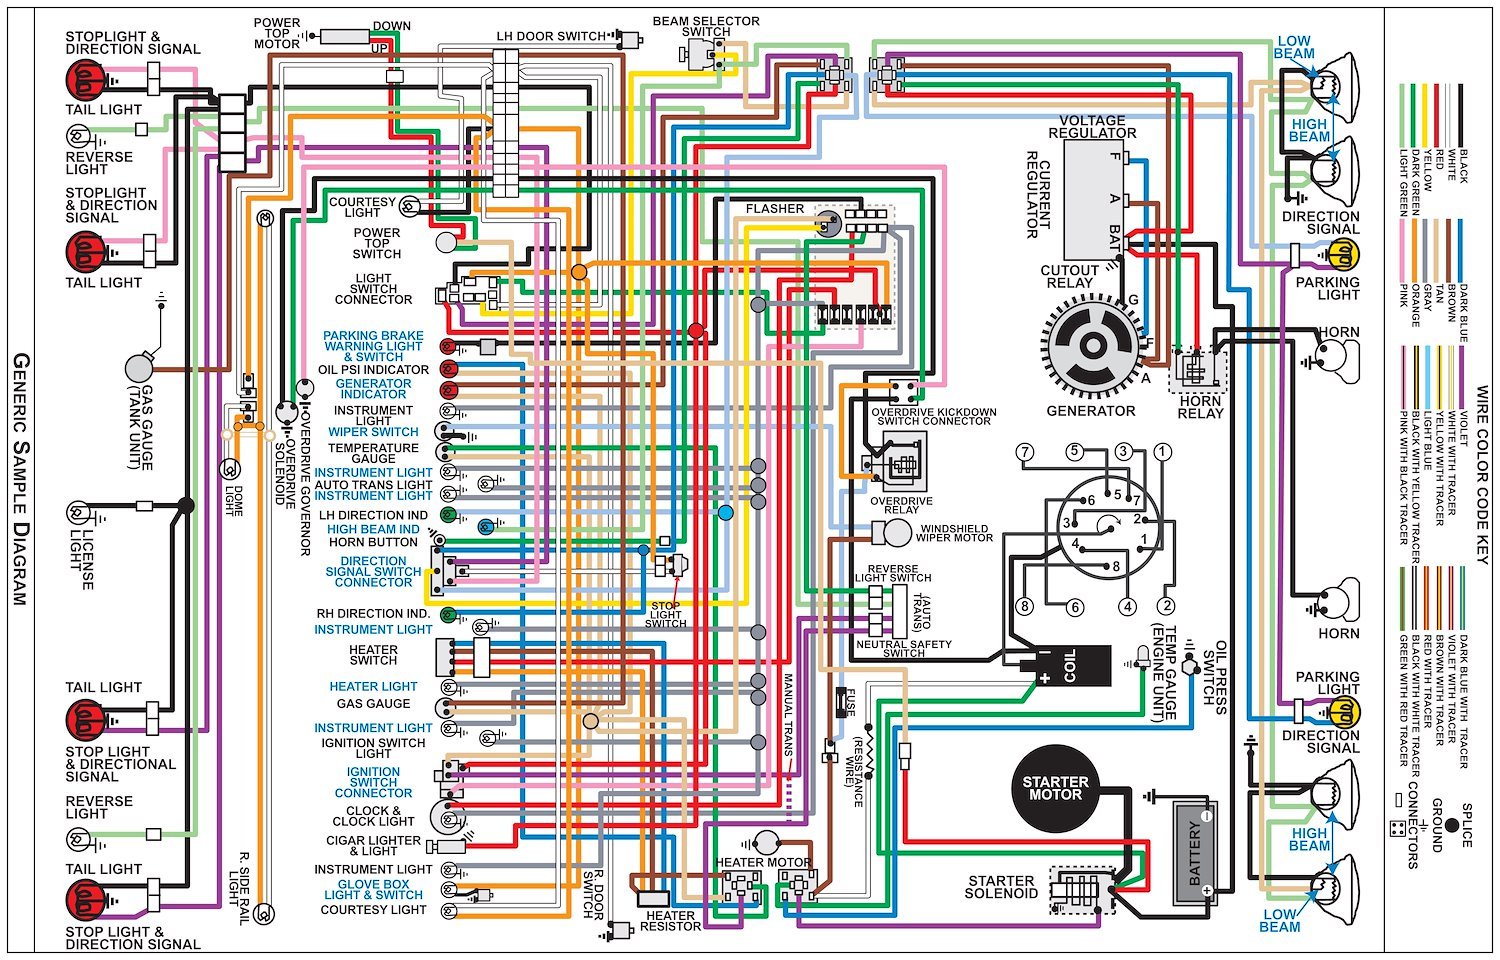 Wiring Diagram for 1970 Dodge Dart with Standard